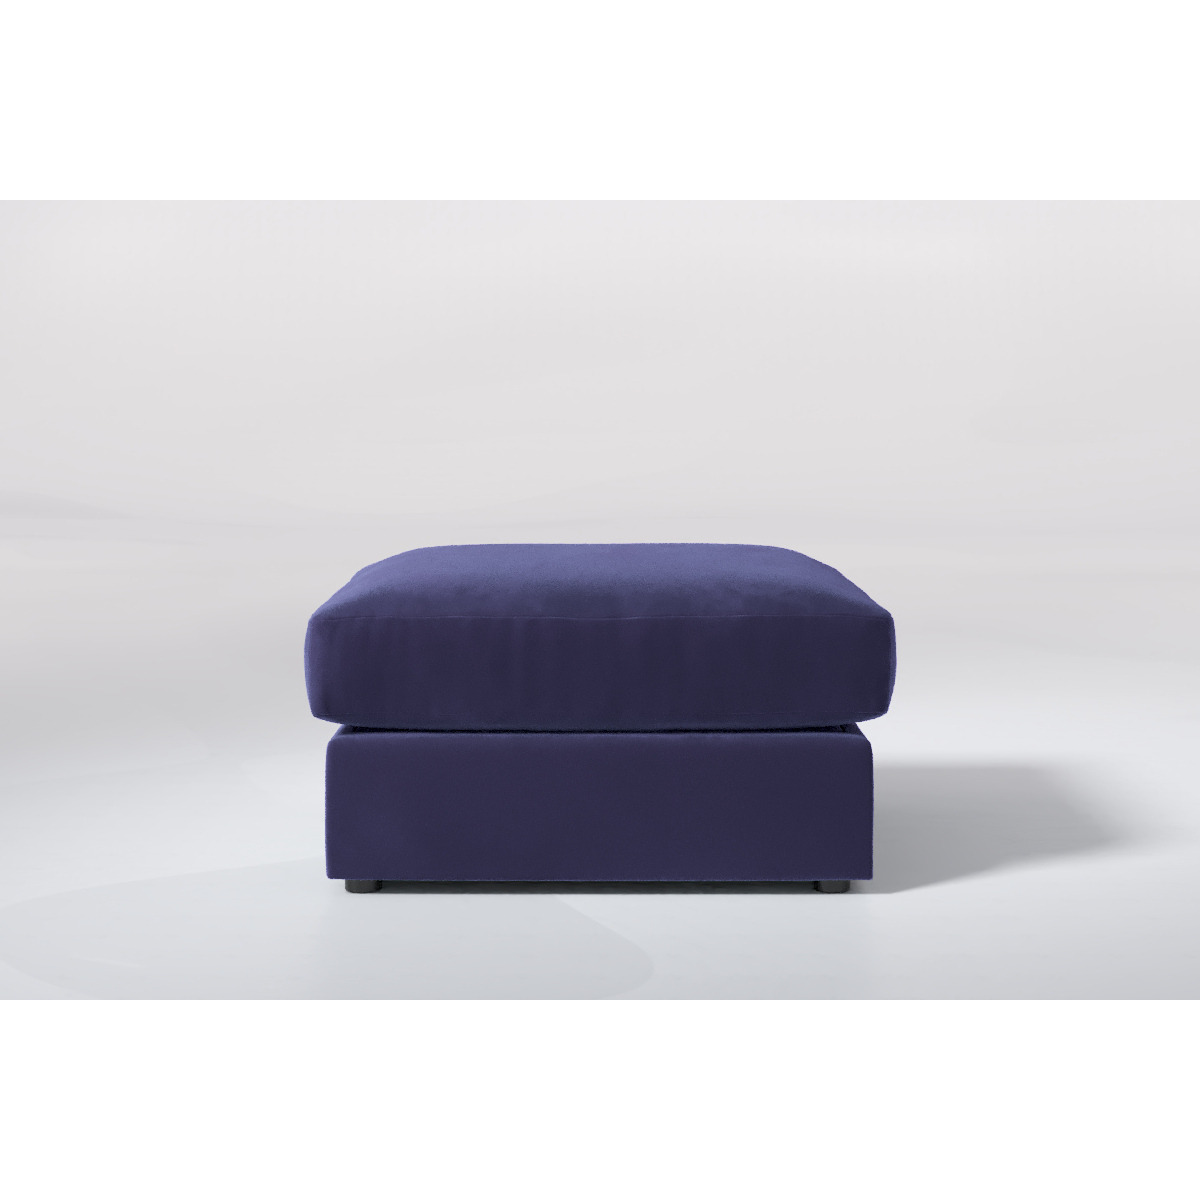 7th Heaven Maxi - Large Storage Stool Soft Touch Velvet Midnight Blue